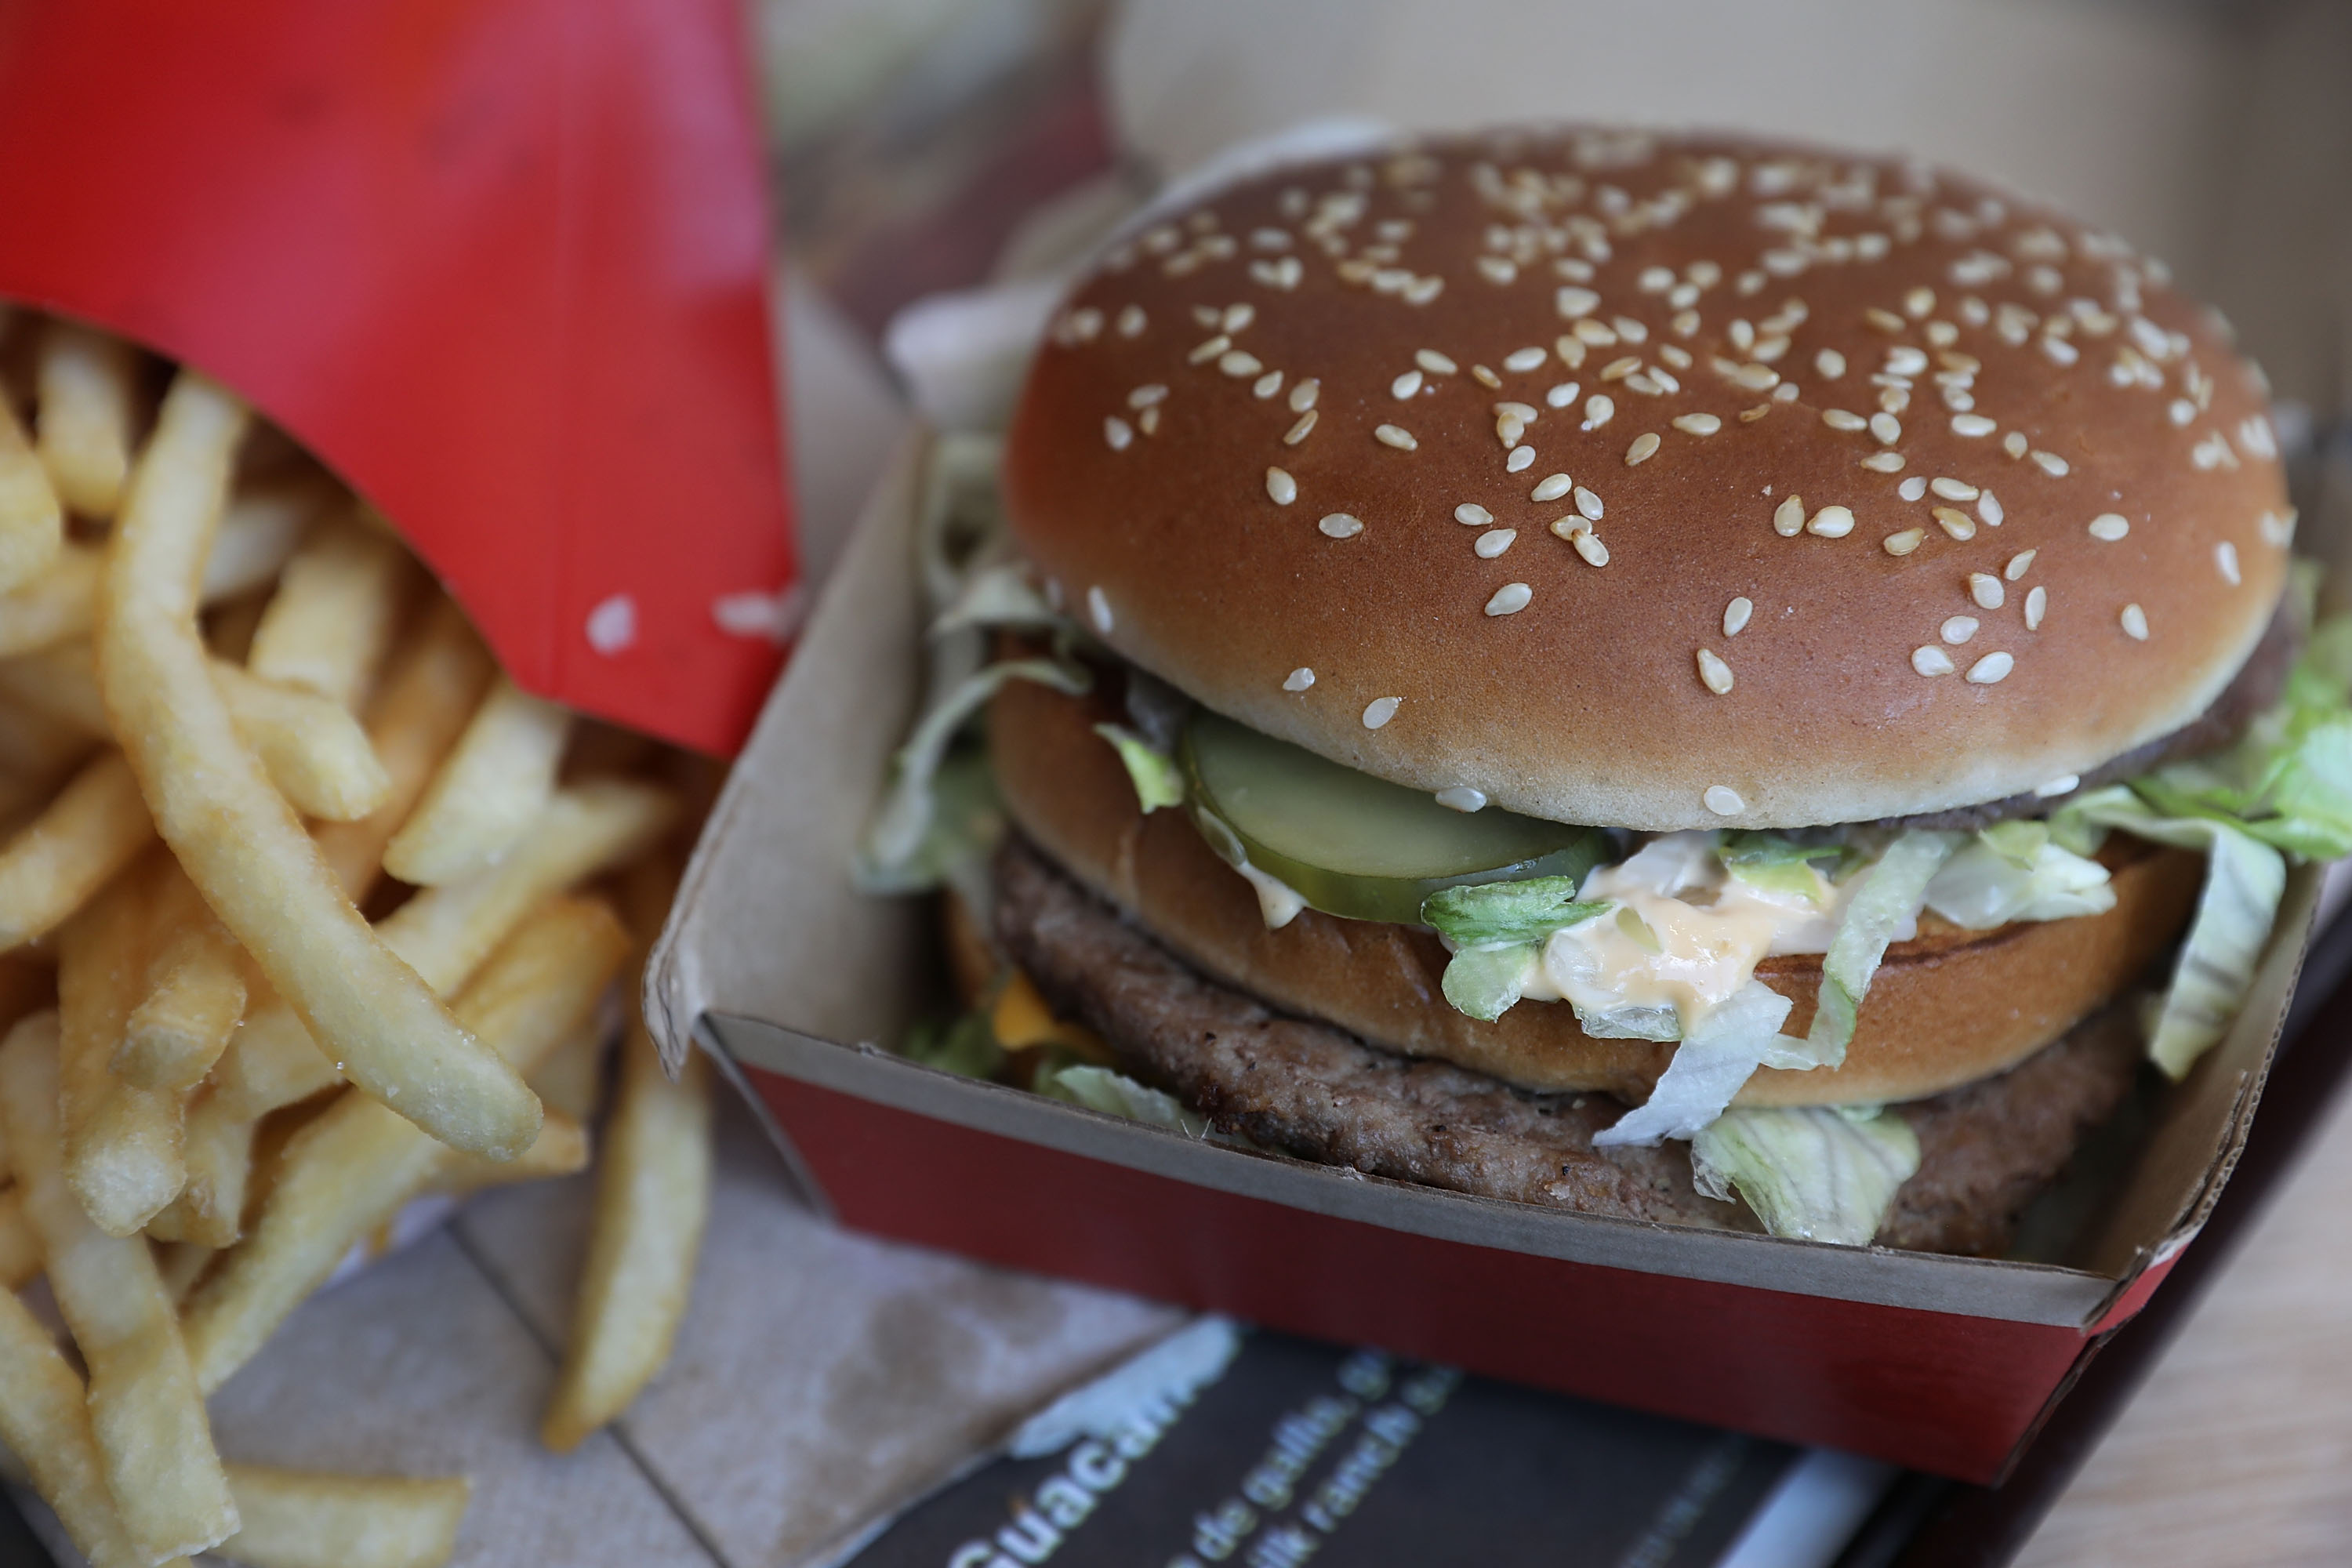 Big Macs Are Only a Penny Each Thanks to a Special DoorDash Deal. Here's How You Can Get One